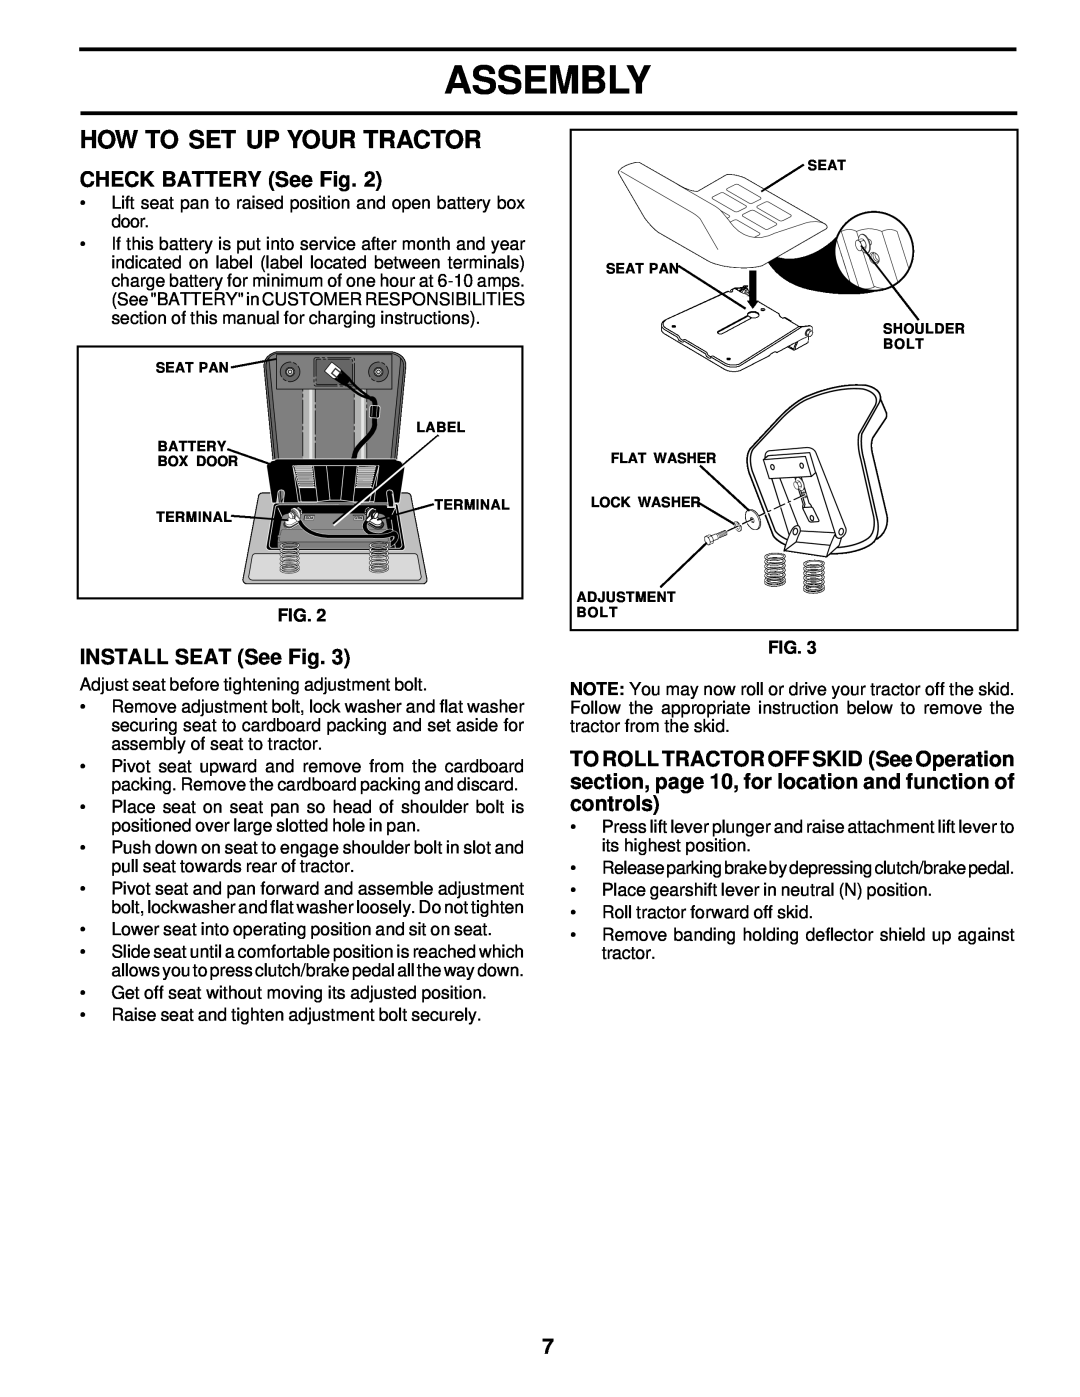 Weed Eater WE16542D owner manual How To Set Up Your Tractor, CHECK BATTERY See Fig, INSTALL SEAT See Fig, Assembly 